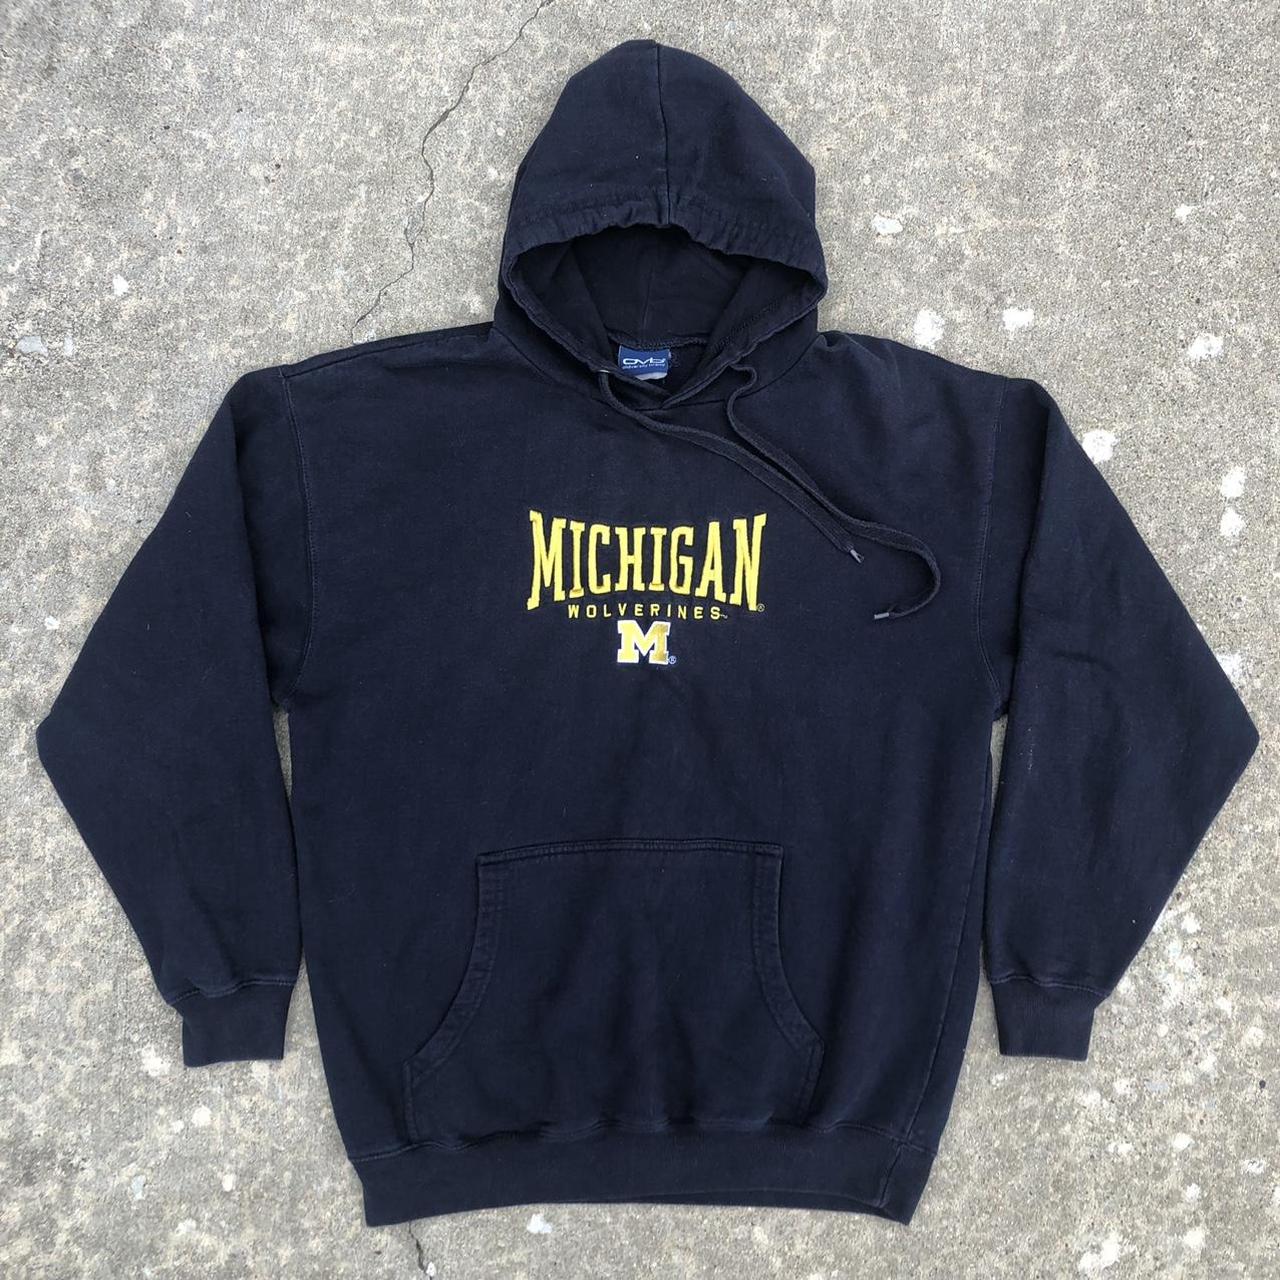 Awesome vintage embroidered University of Michigan... - Depop